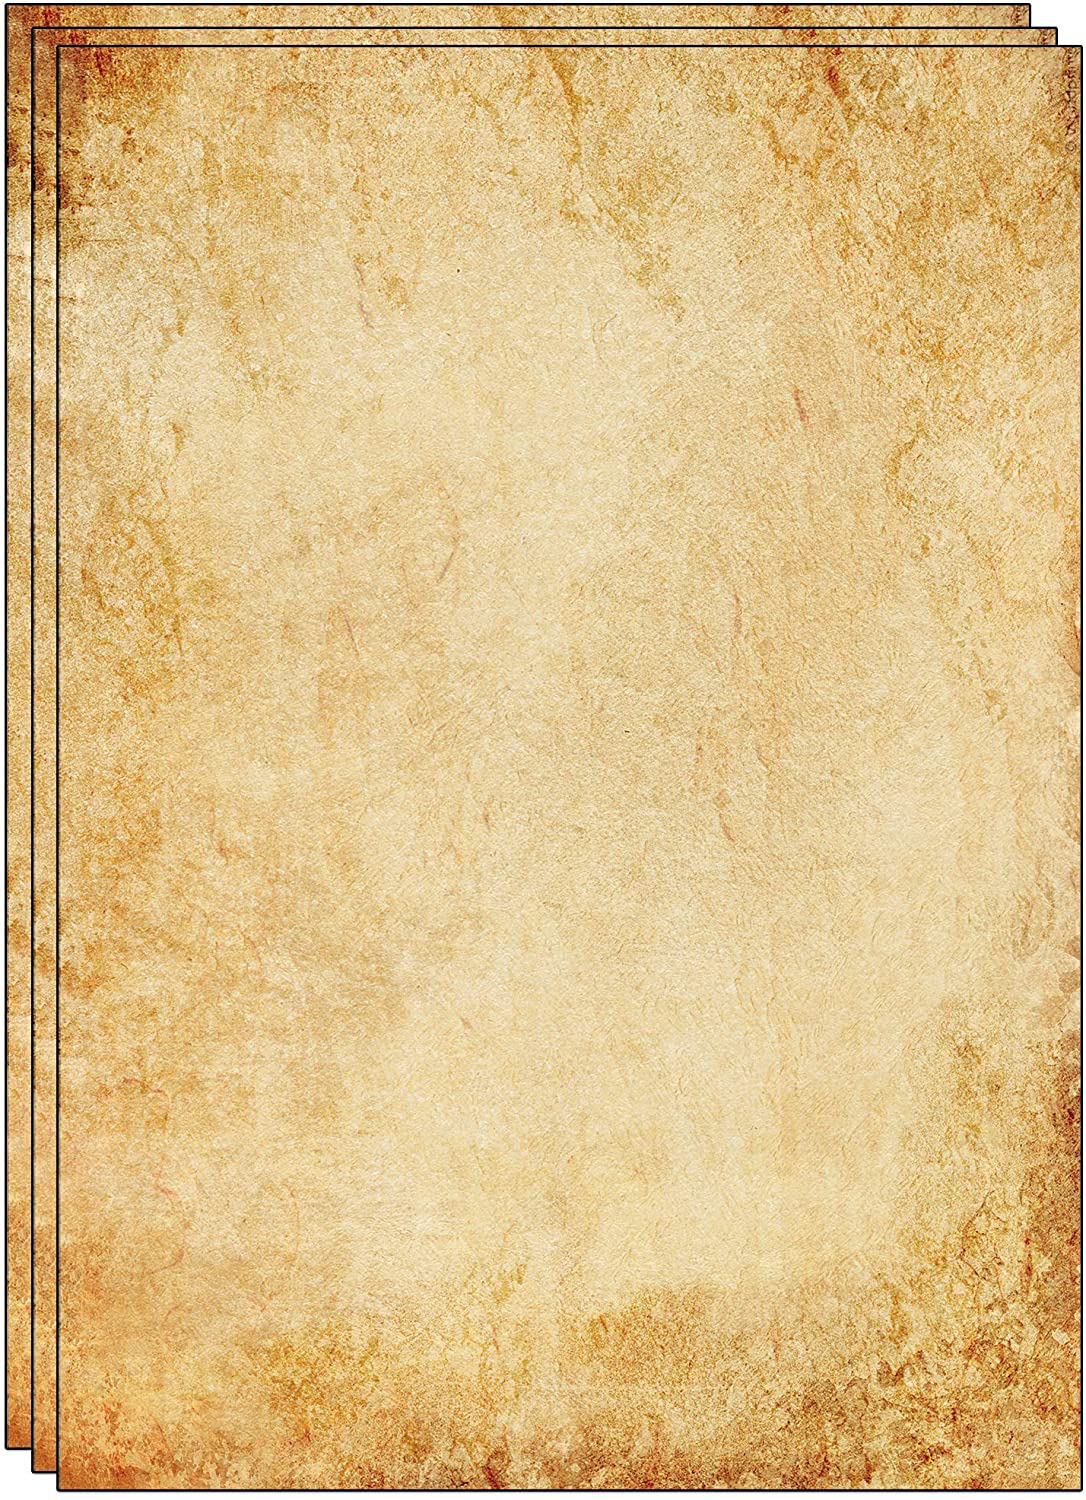 Old Fashioned Faux Parchment Paper Aged Paper Antique Looking 8.27 x 11.7 Inches